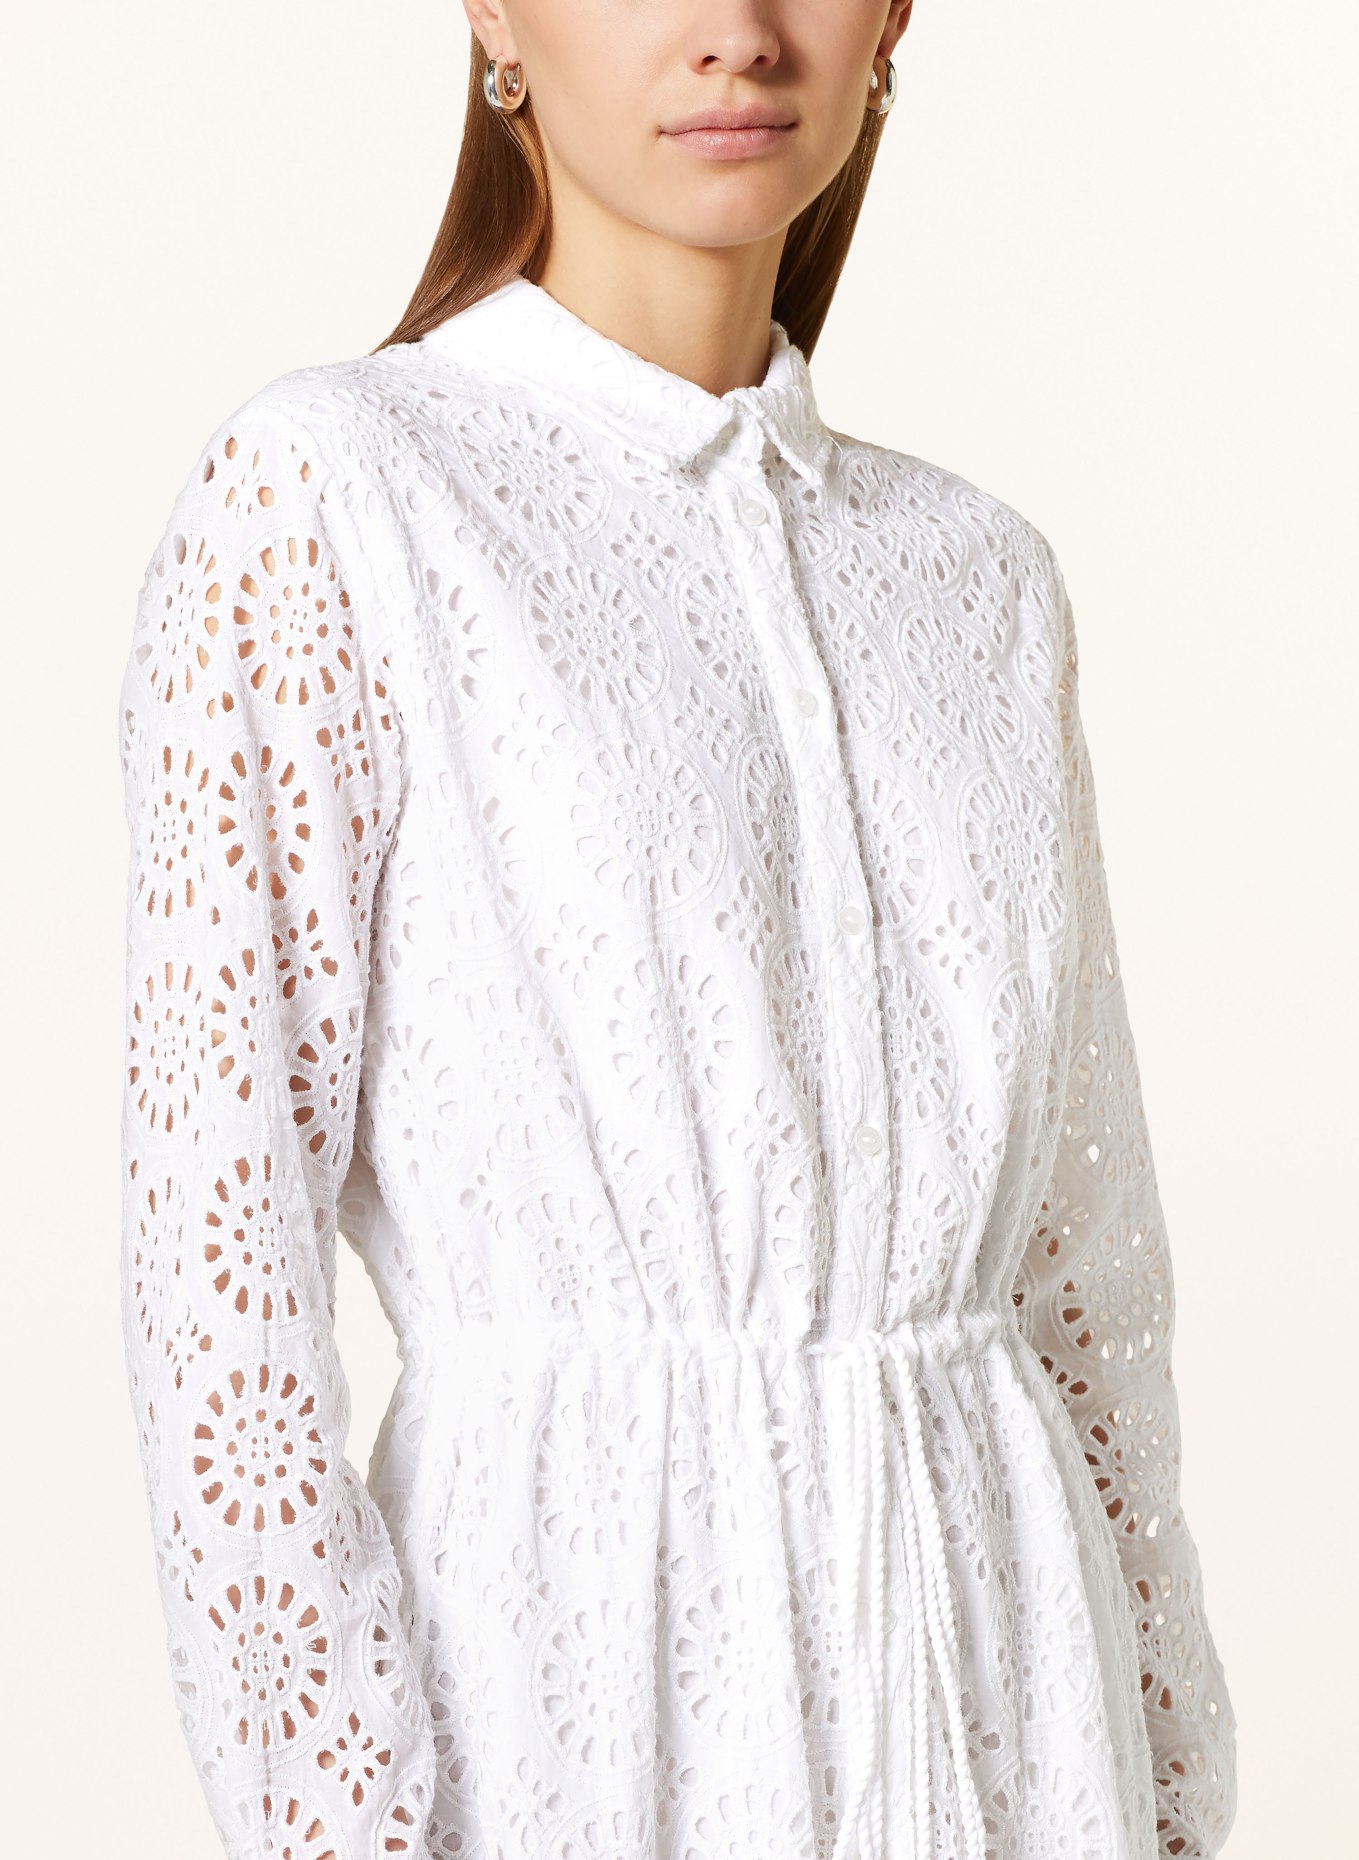 Pepe Jeans Shirt dress ETHEL made of lace, Color: WHITE (Image 4)